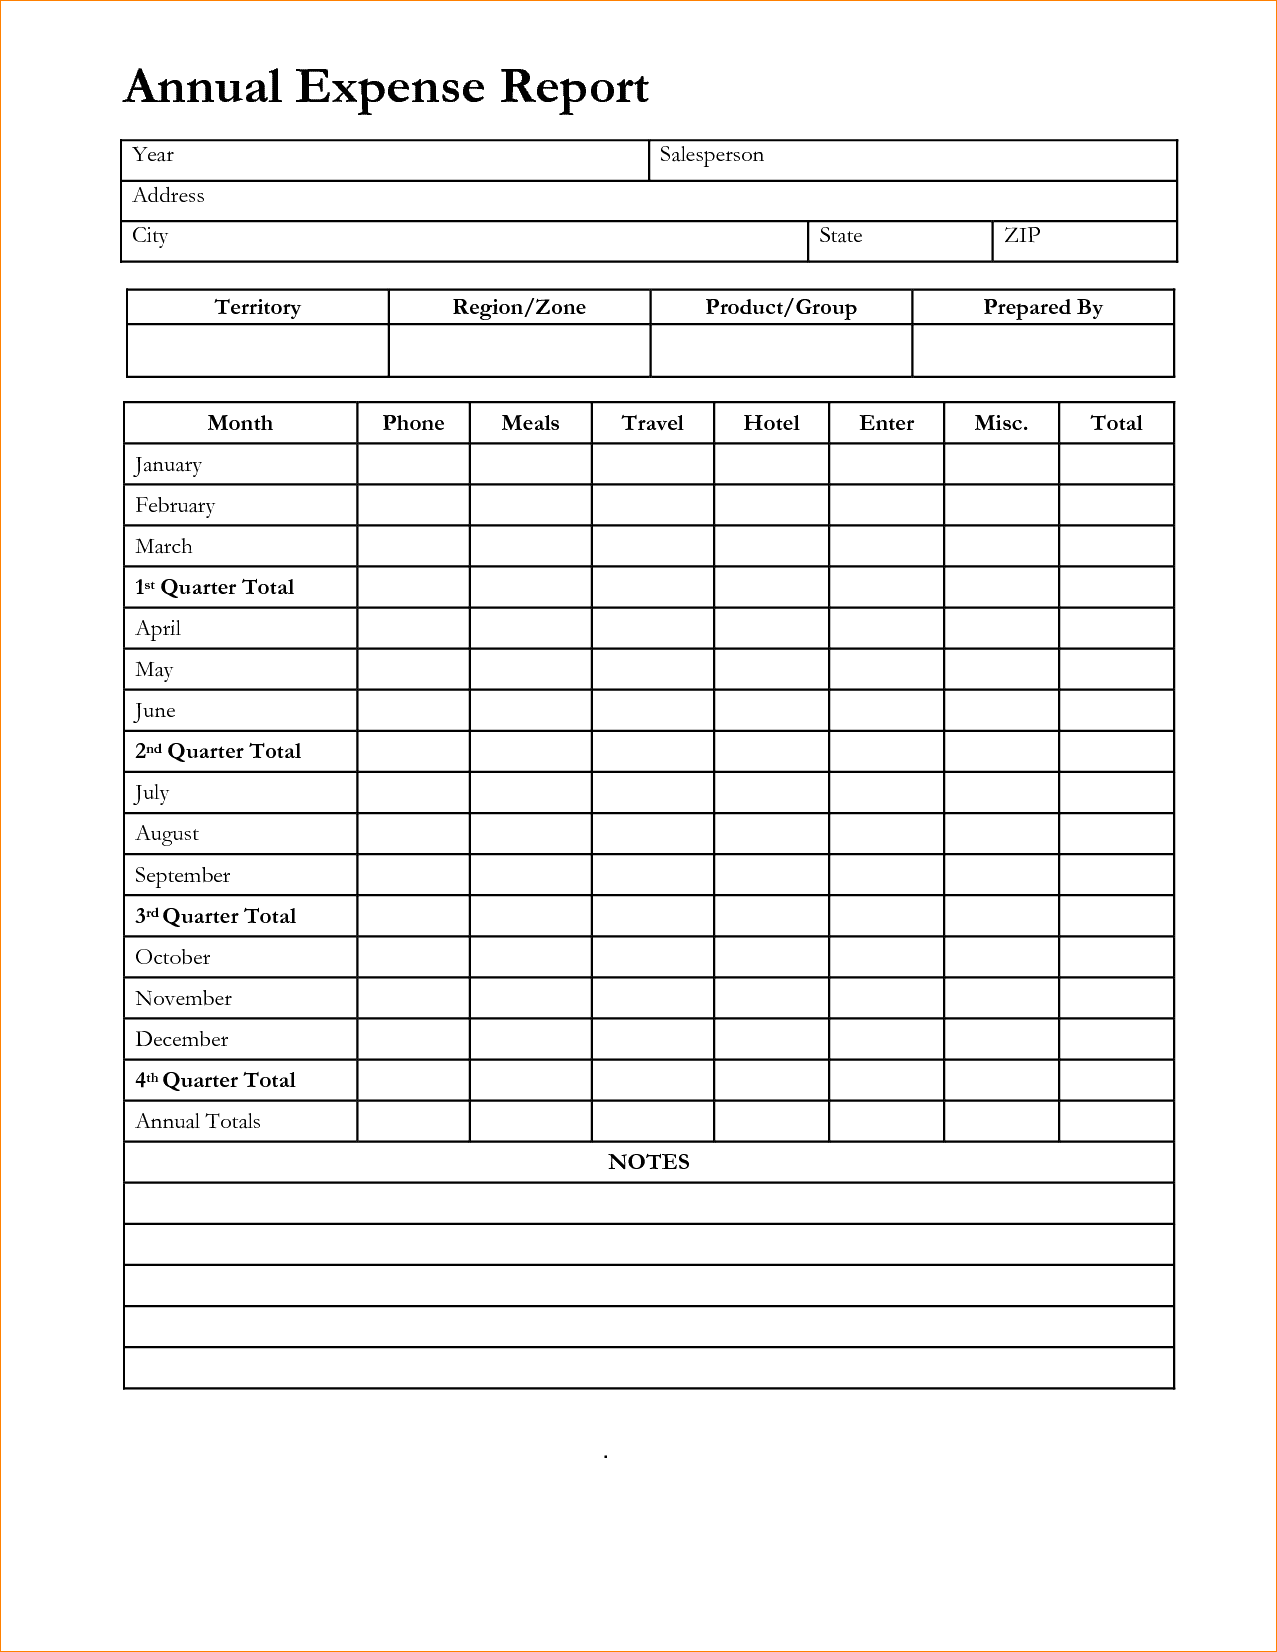 Monthly Expense Report Template 6 Excelxo 10168 Hot Sex Picture 9636